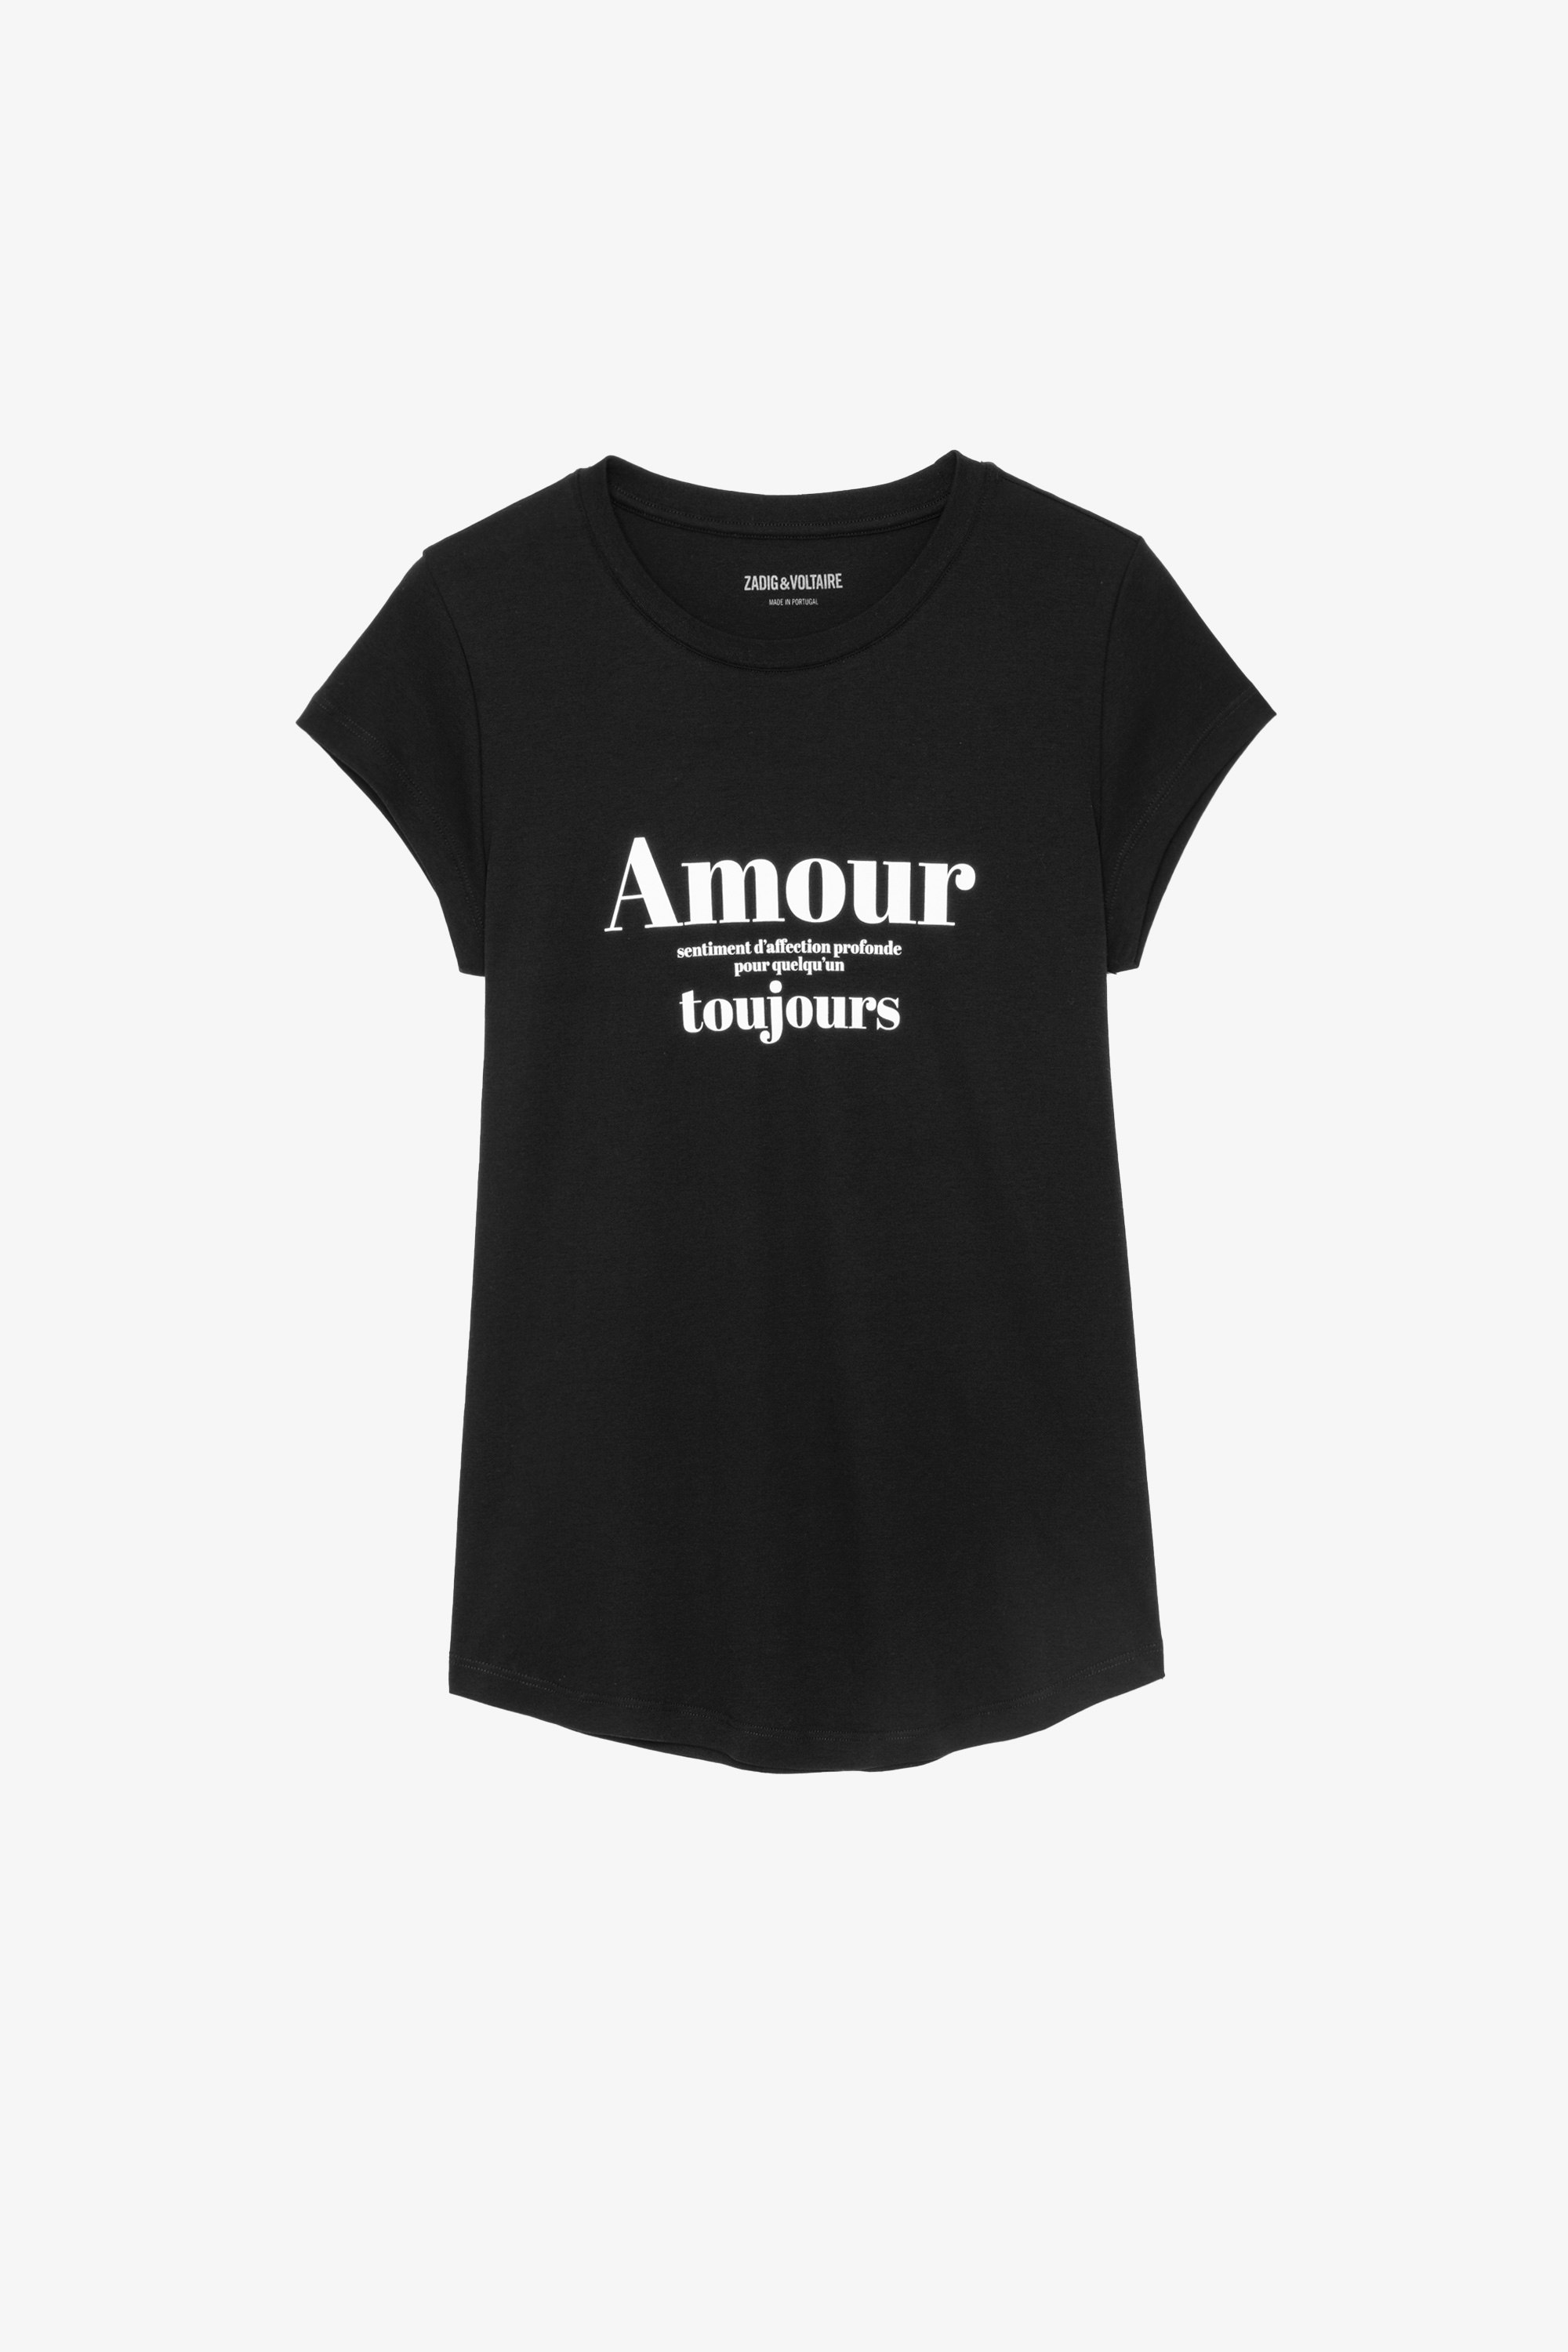 Skinny Amour Toujours T-Shirt Women’s black cotton T-shirt with contrasting “Amour Toujours” print